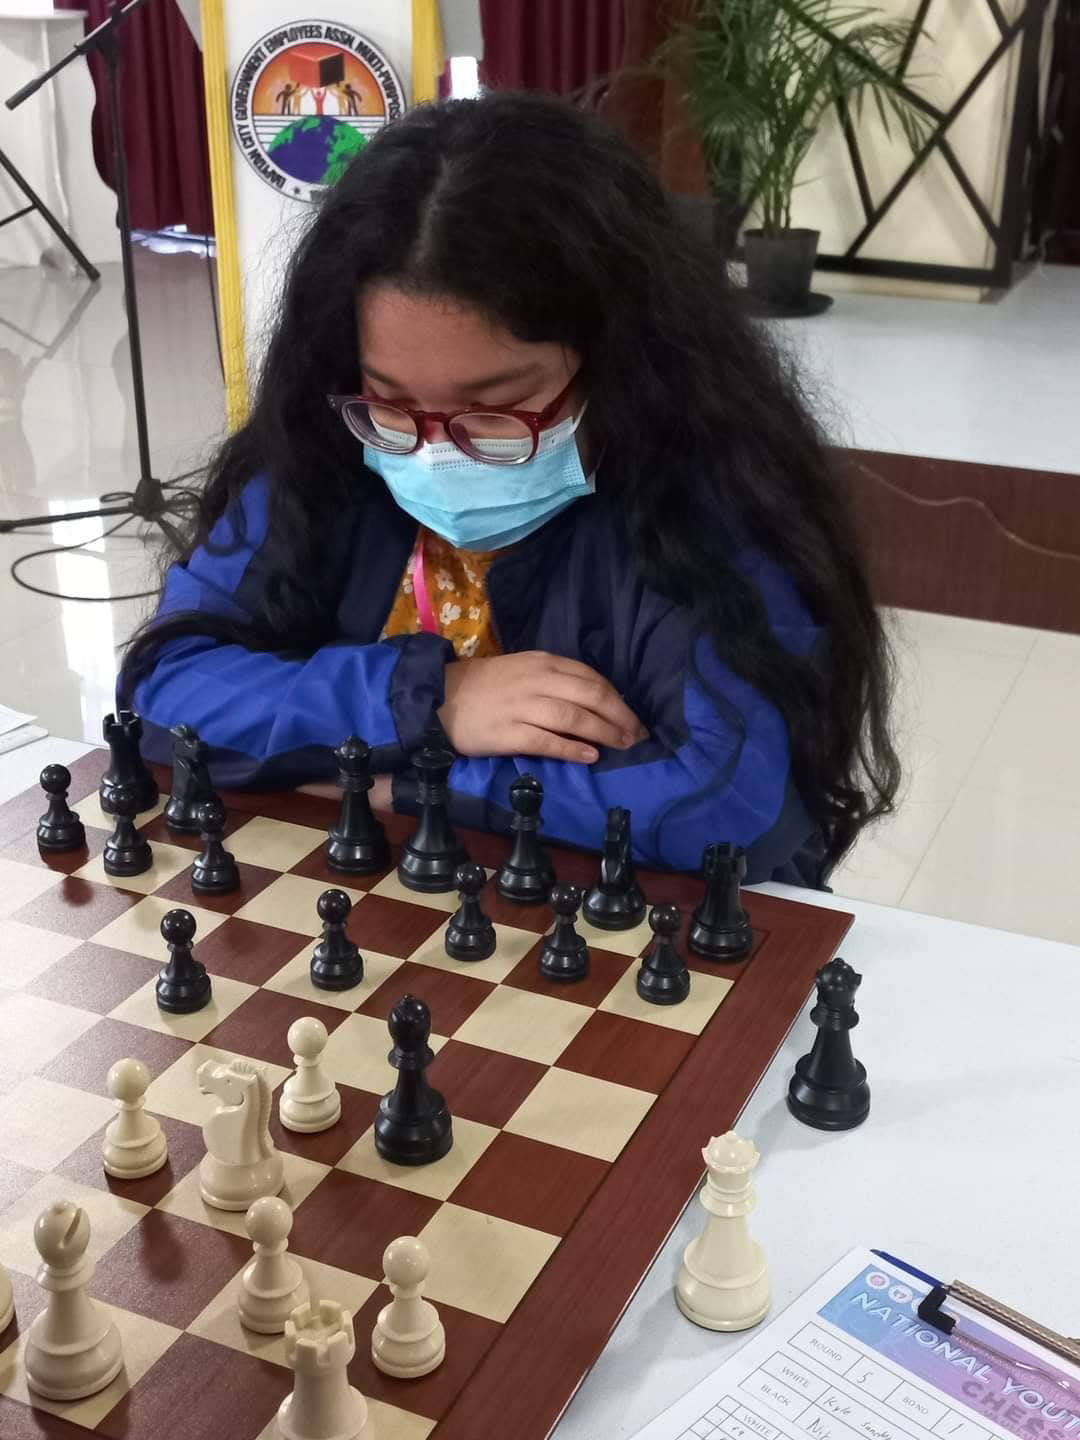 Earning National Master in chess